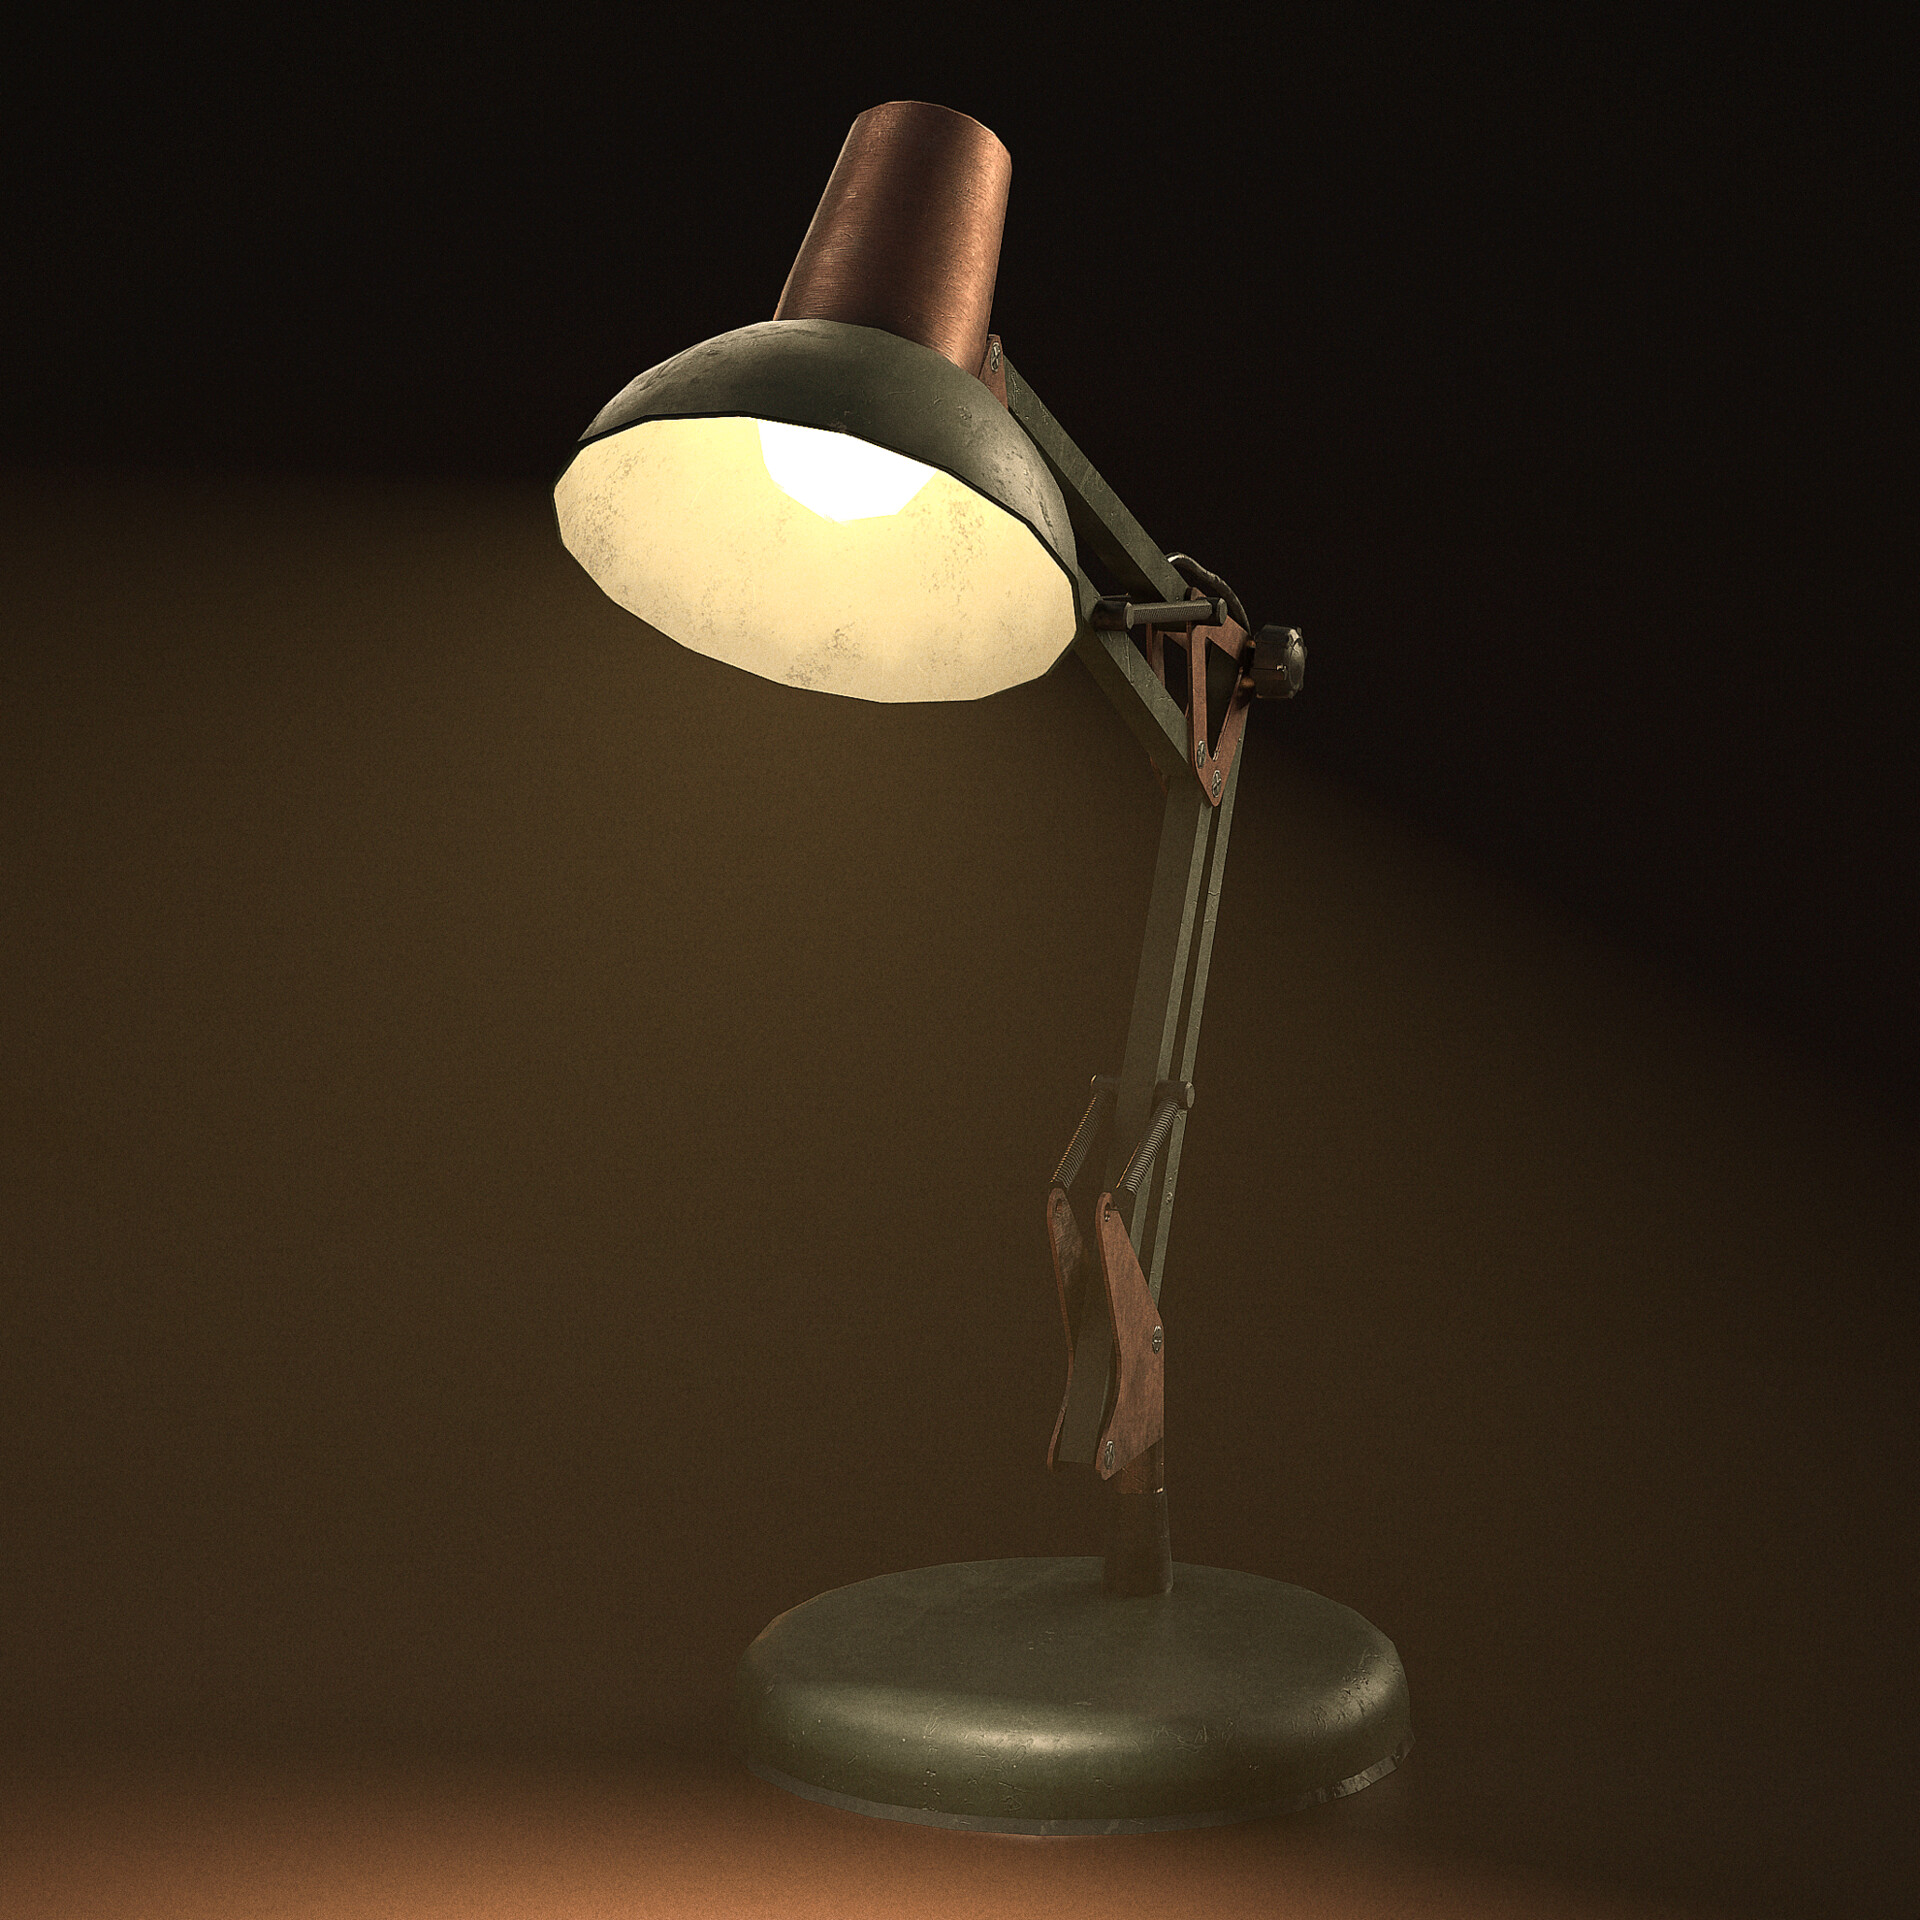 ArtStation - Table lamp and my lighting practice